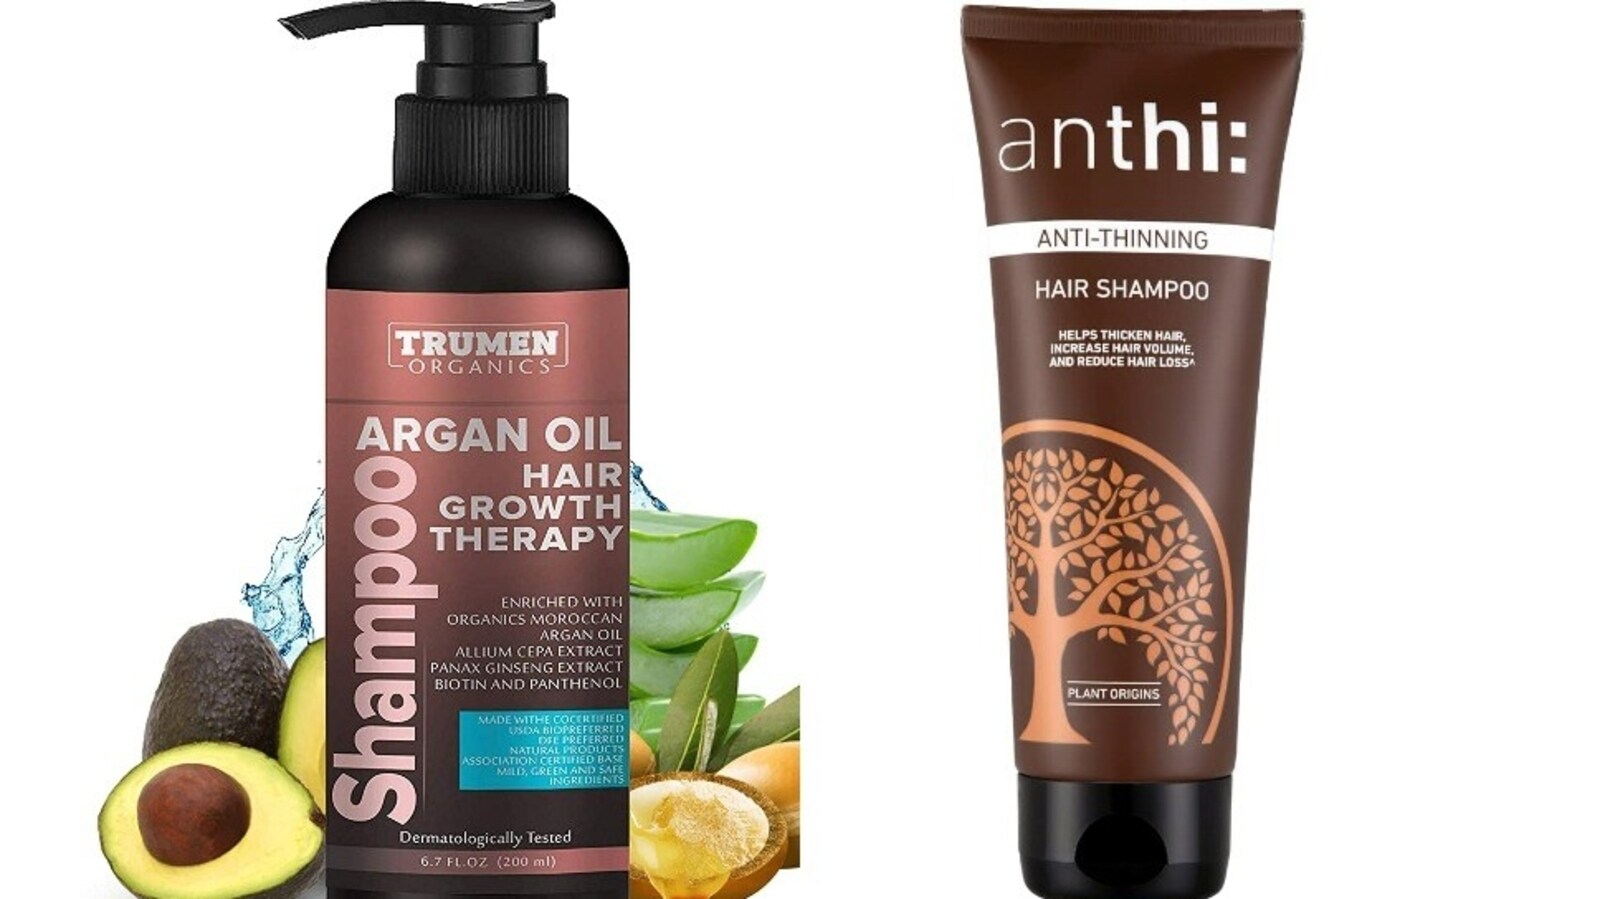 Use anti-hair thinning shampoos for thicker, fuller and healthier hair